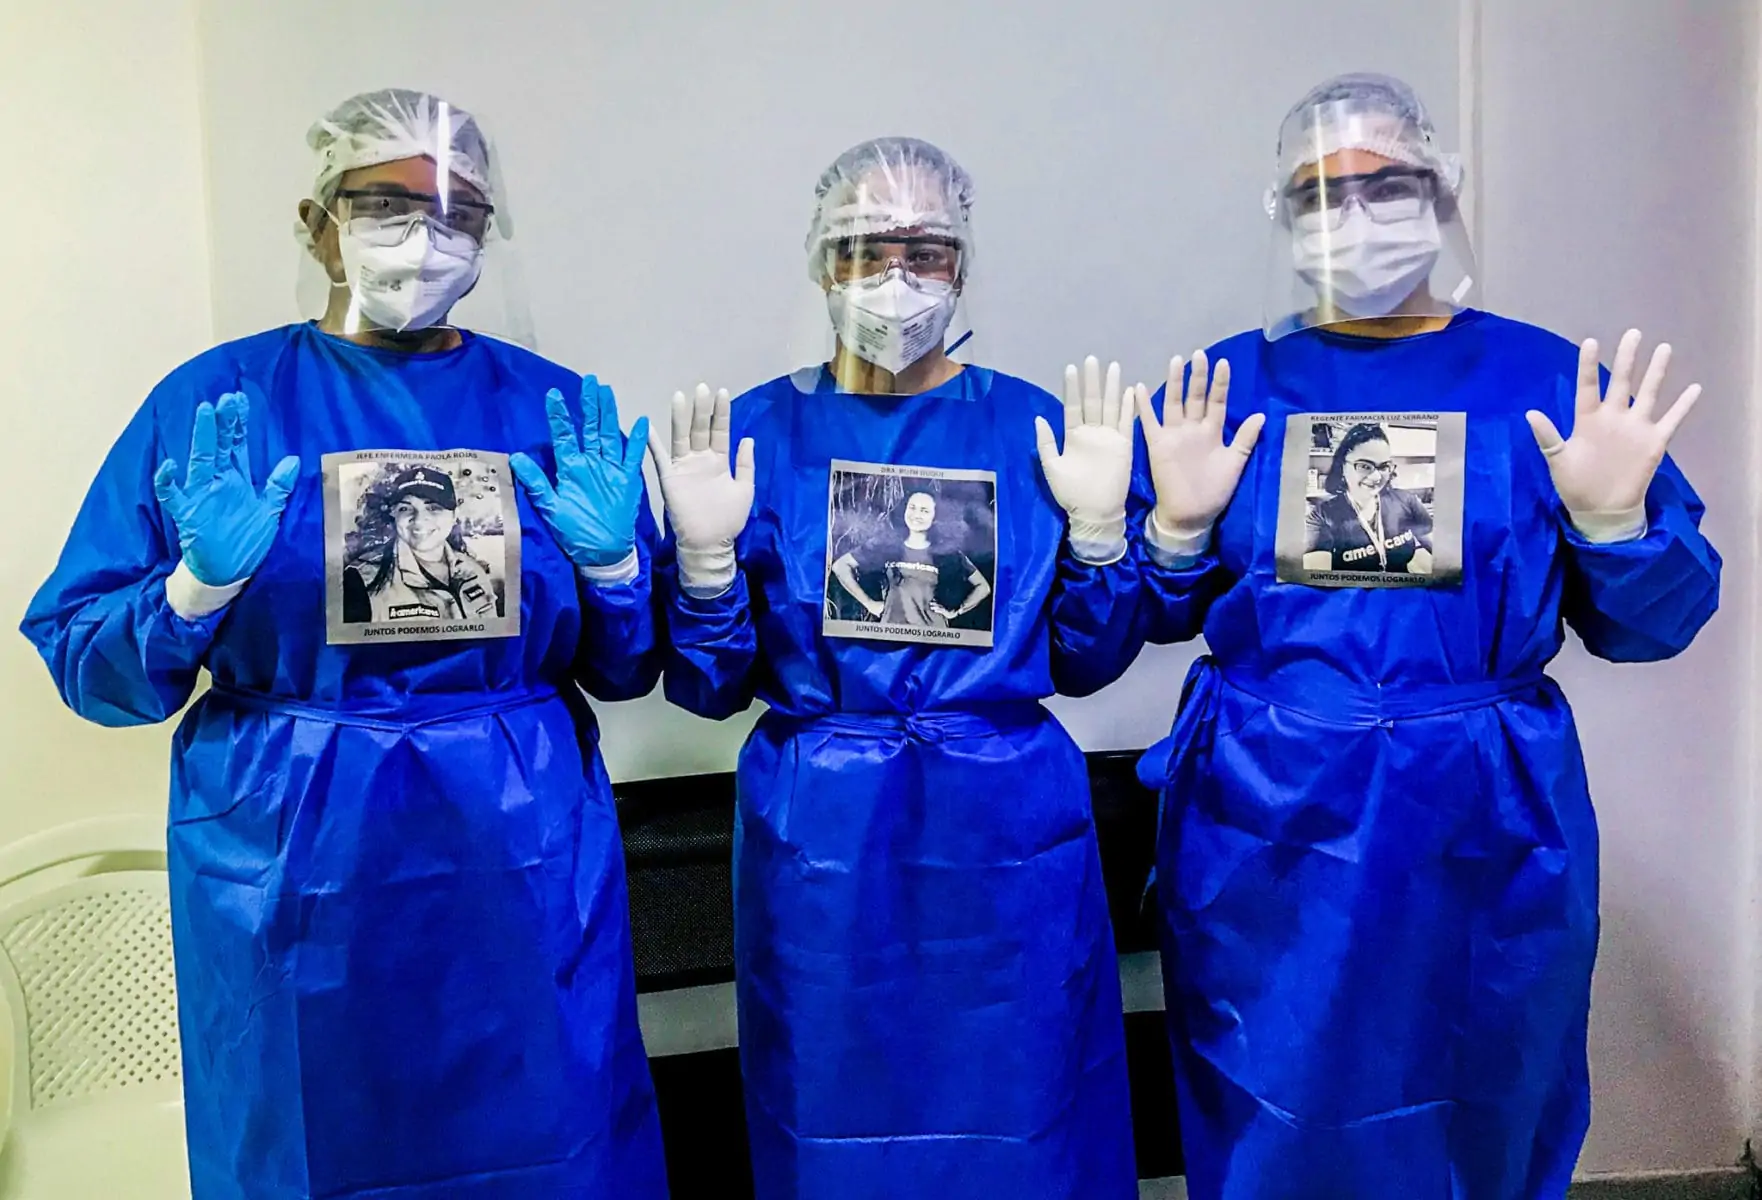 Three medical staff members in full protective gear with gown, gloves, face mask, face shield, and their name plates attached to their gowns..